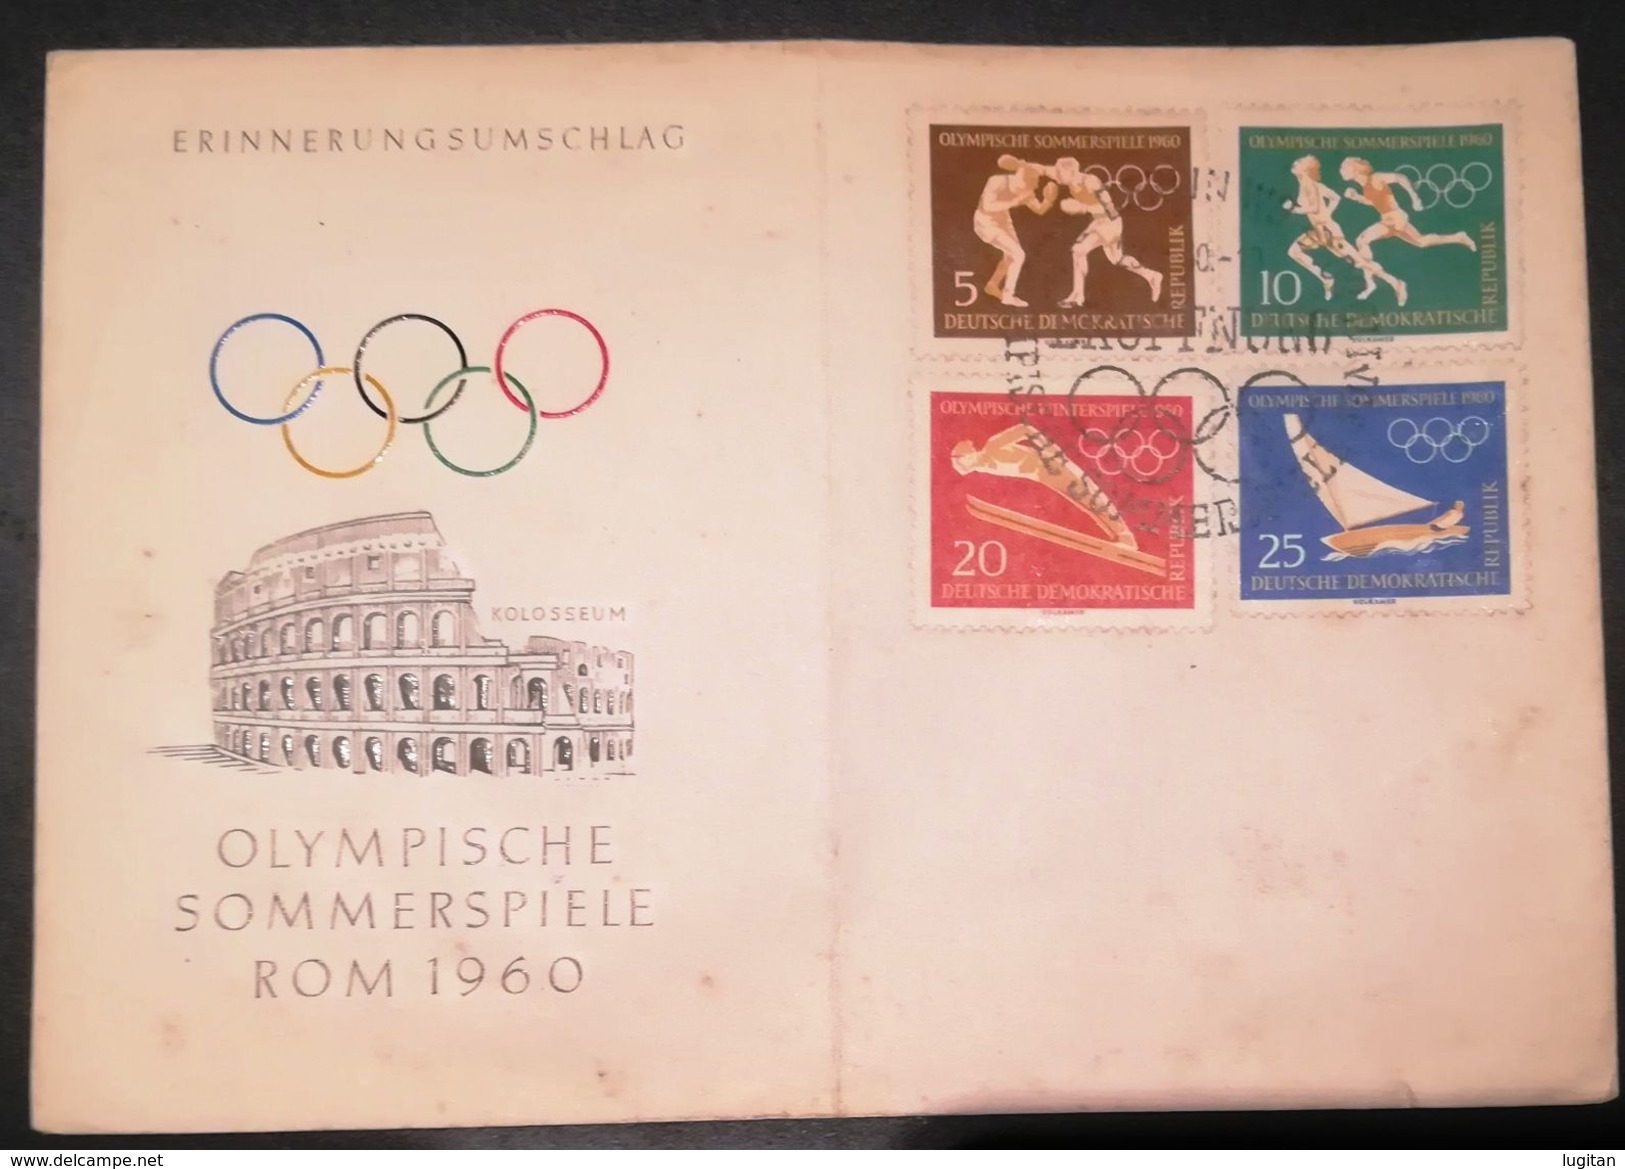 FILATELIA - TEMATICA SPORT - GERMANIA  DDR - GERMANY - OLIMPIADI INVERNALI SQUAW VALLEY - 1960 FDC - OLYMPIC GAMES - Winter 1960: Squaw Valley